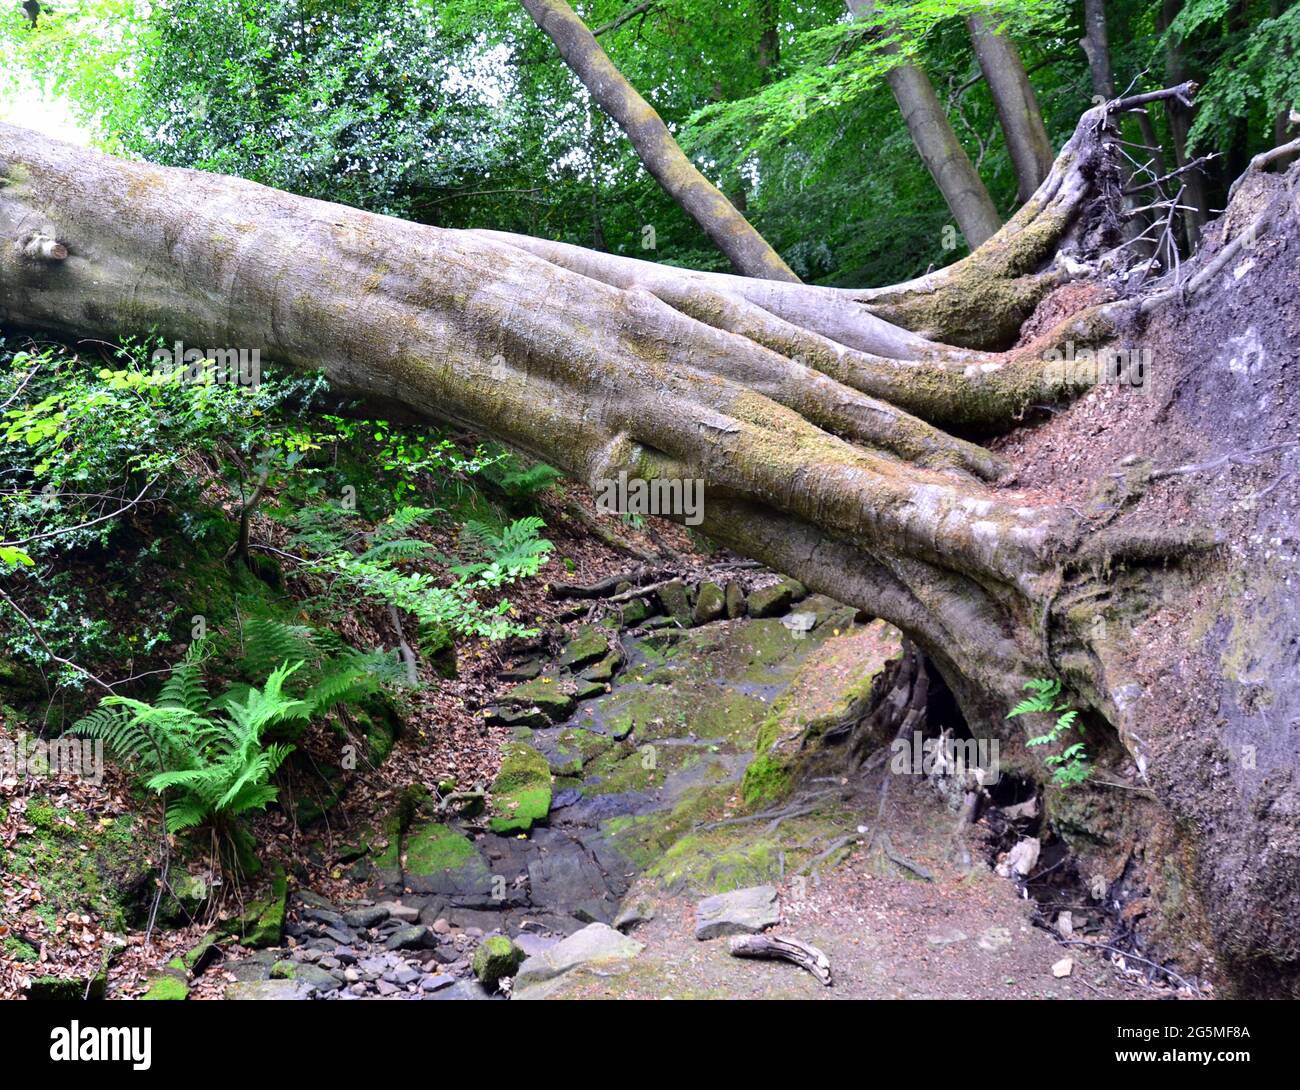 A large fallen tree over a dried up stream course in Greater Manchester, England, Britain, United Kingdom Stock Photo